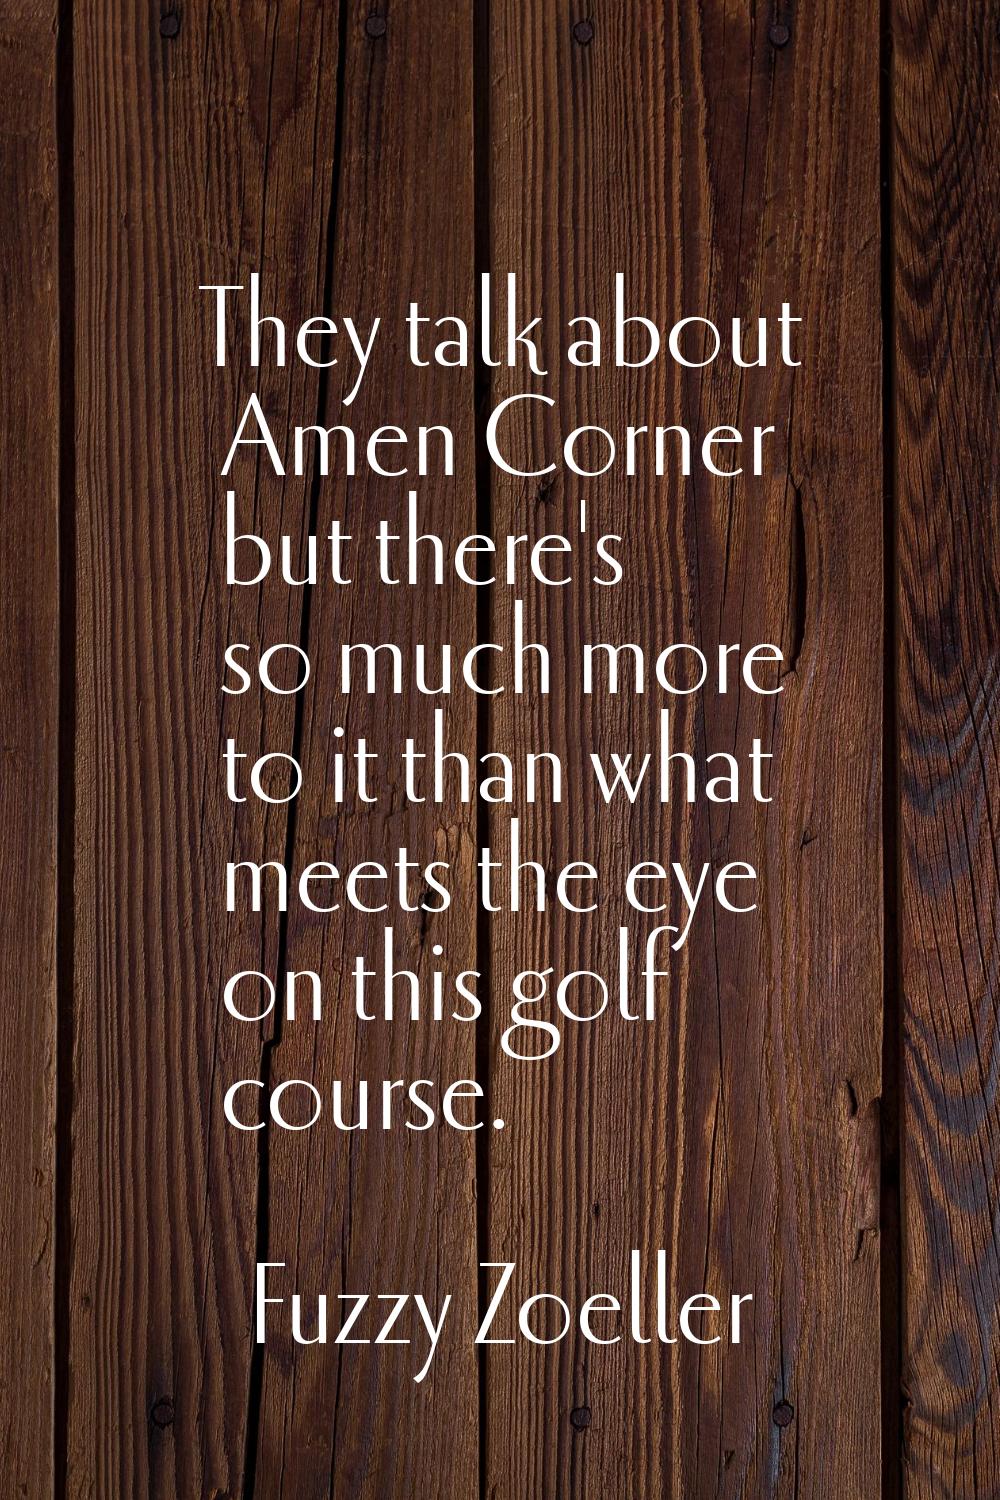 They talk about Amen Corner but there's so much more to it than what meets the eye on this golf cou